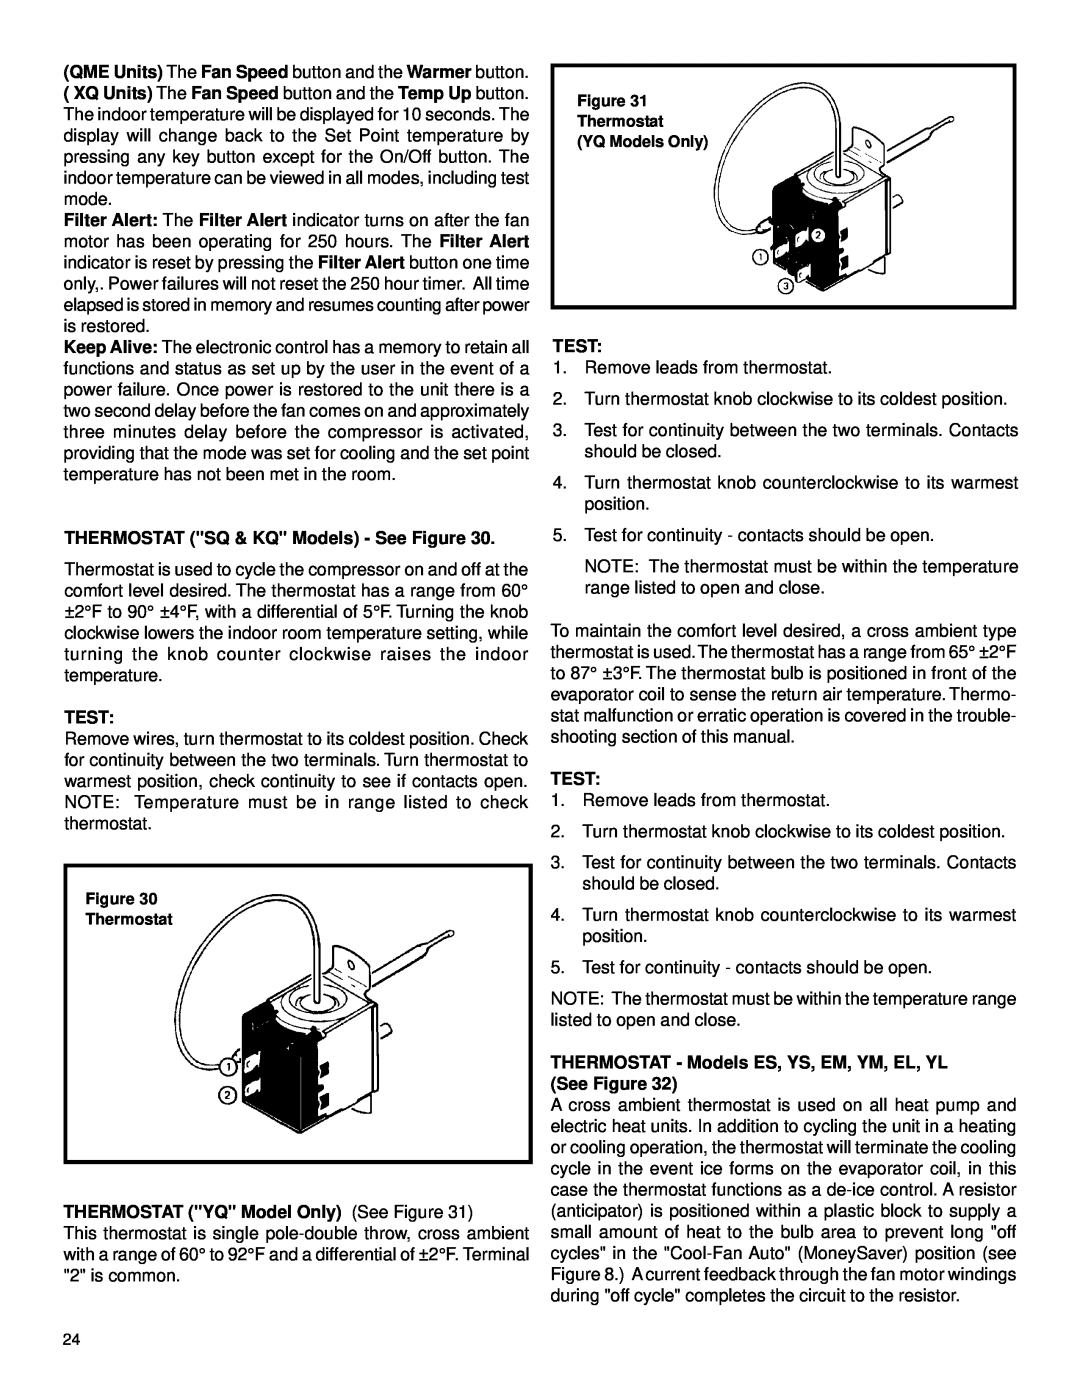 Friedrich 2003 service manual Test, THERMOSTAT SQ & KQ Models - See Figure, THERMOSTAT YQ Model Only See Figure 